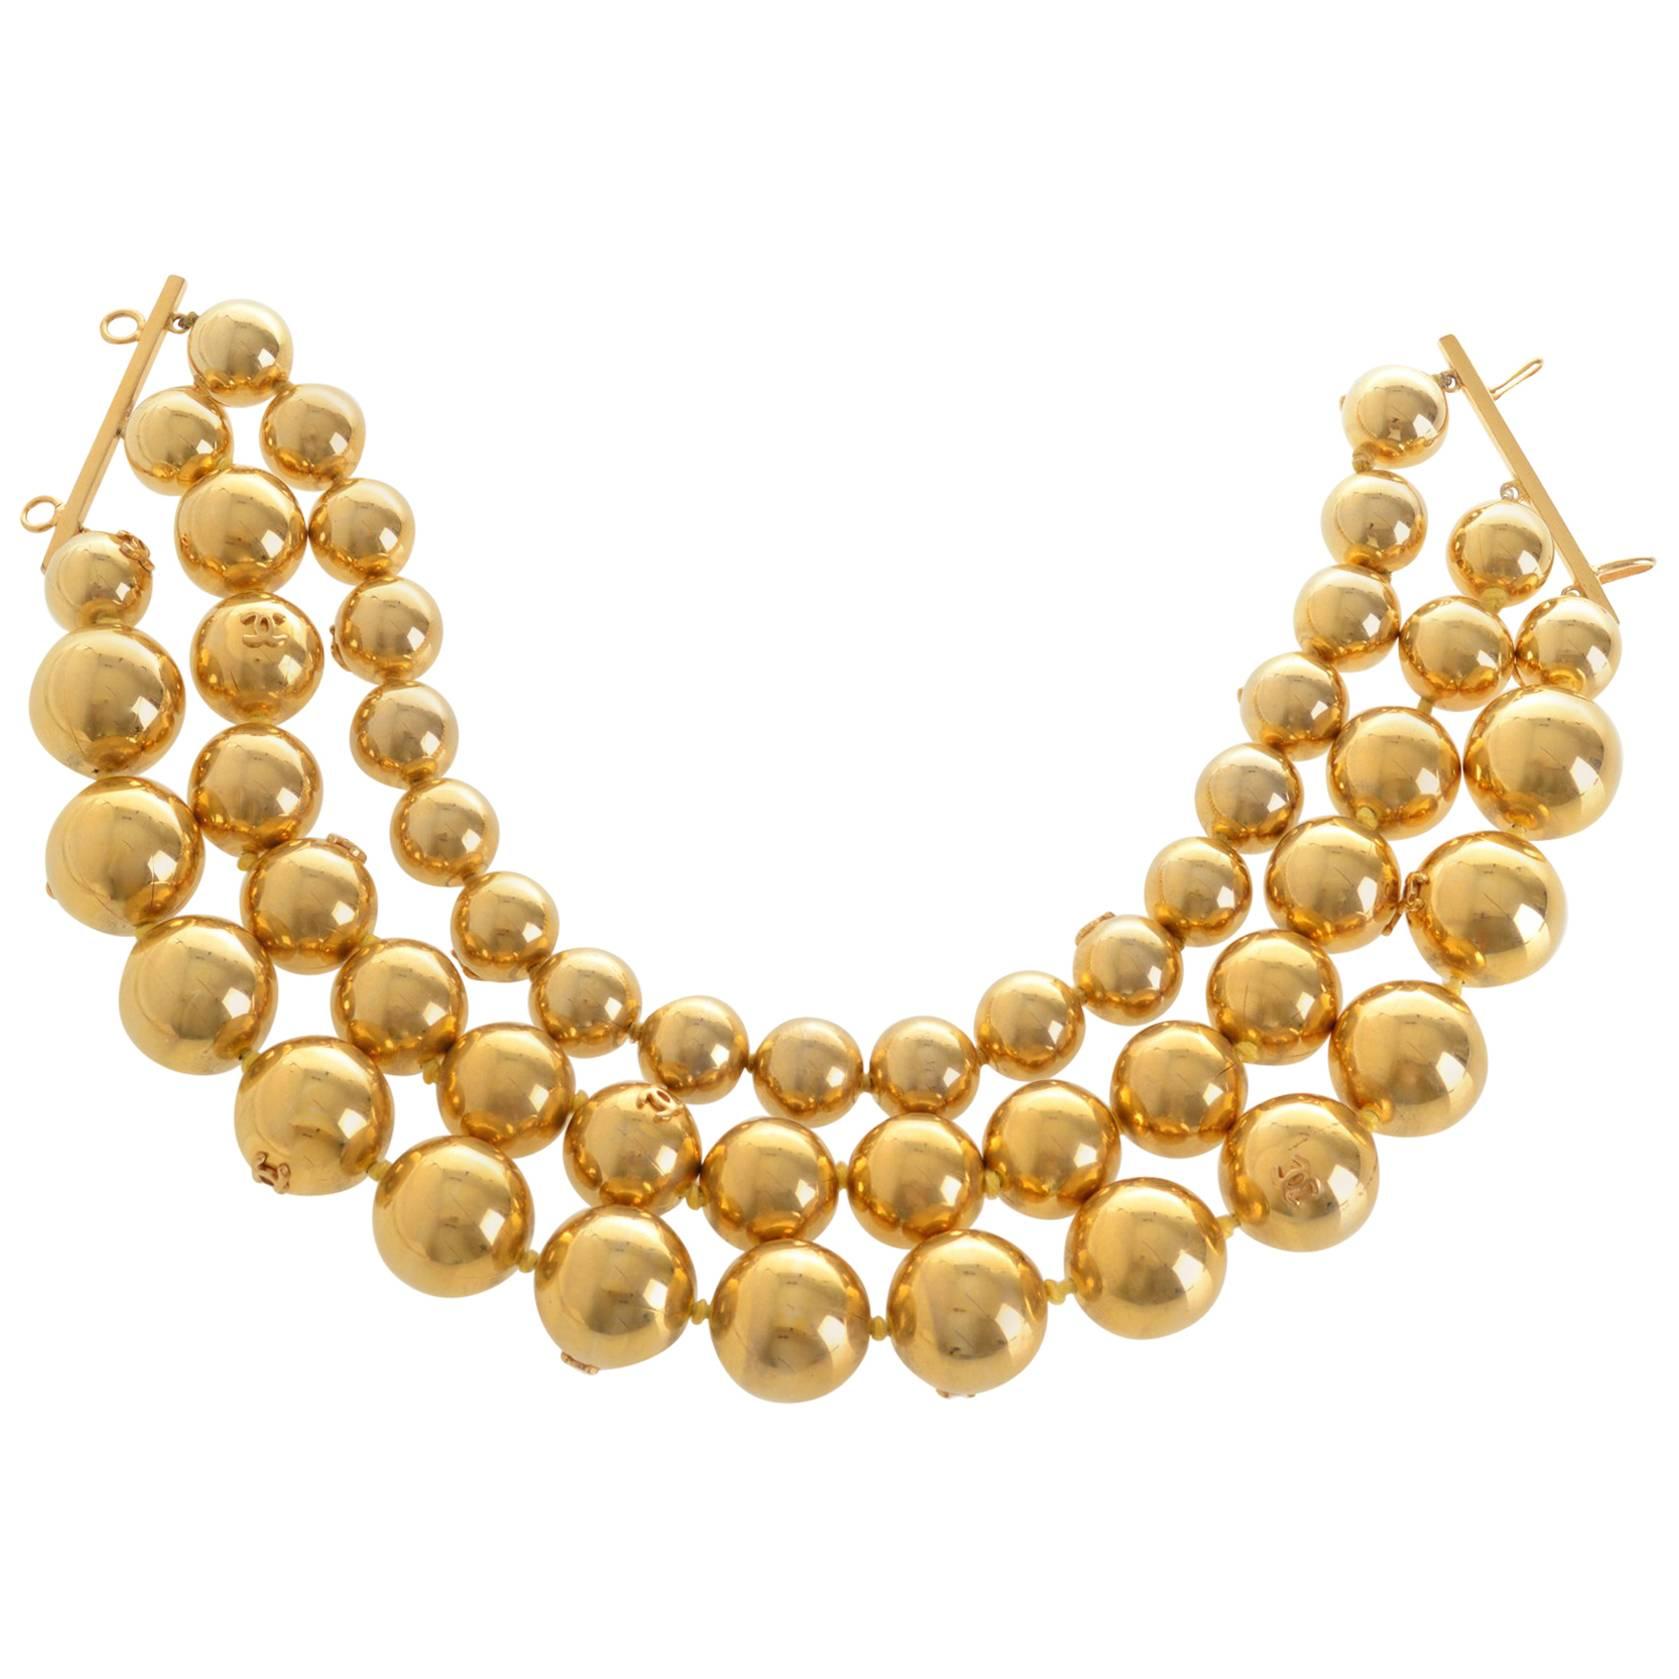 1990s Chanel Gold-Tone Beaded Triple Strand Choker Necklace